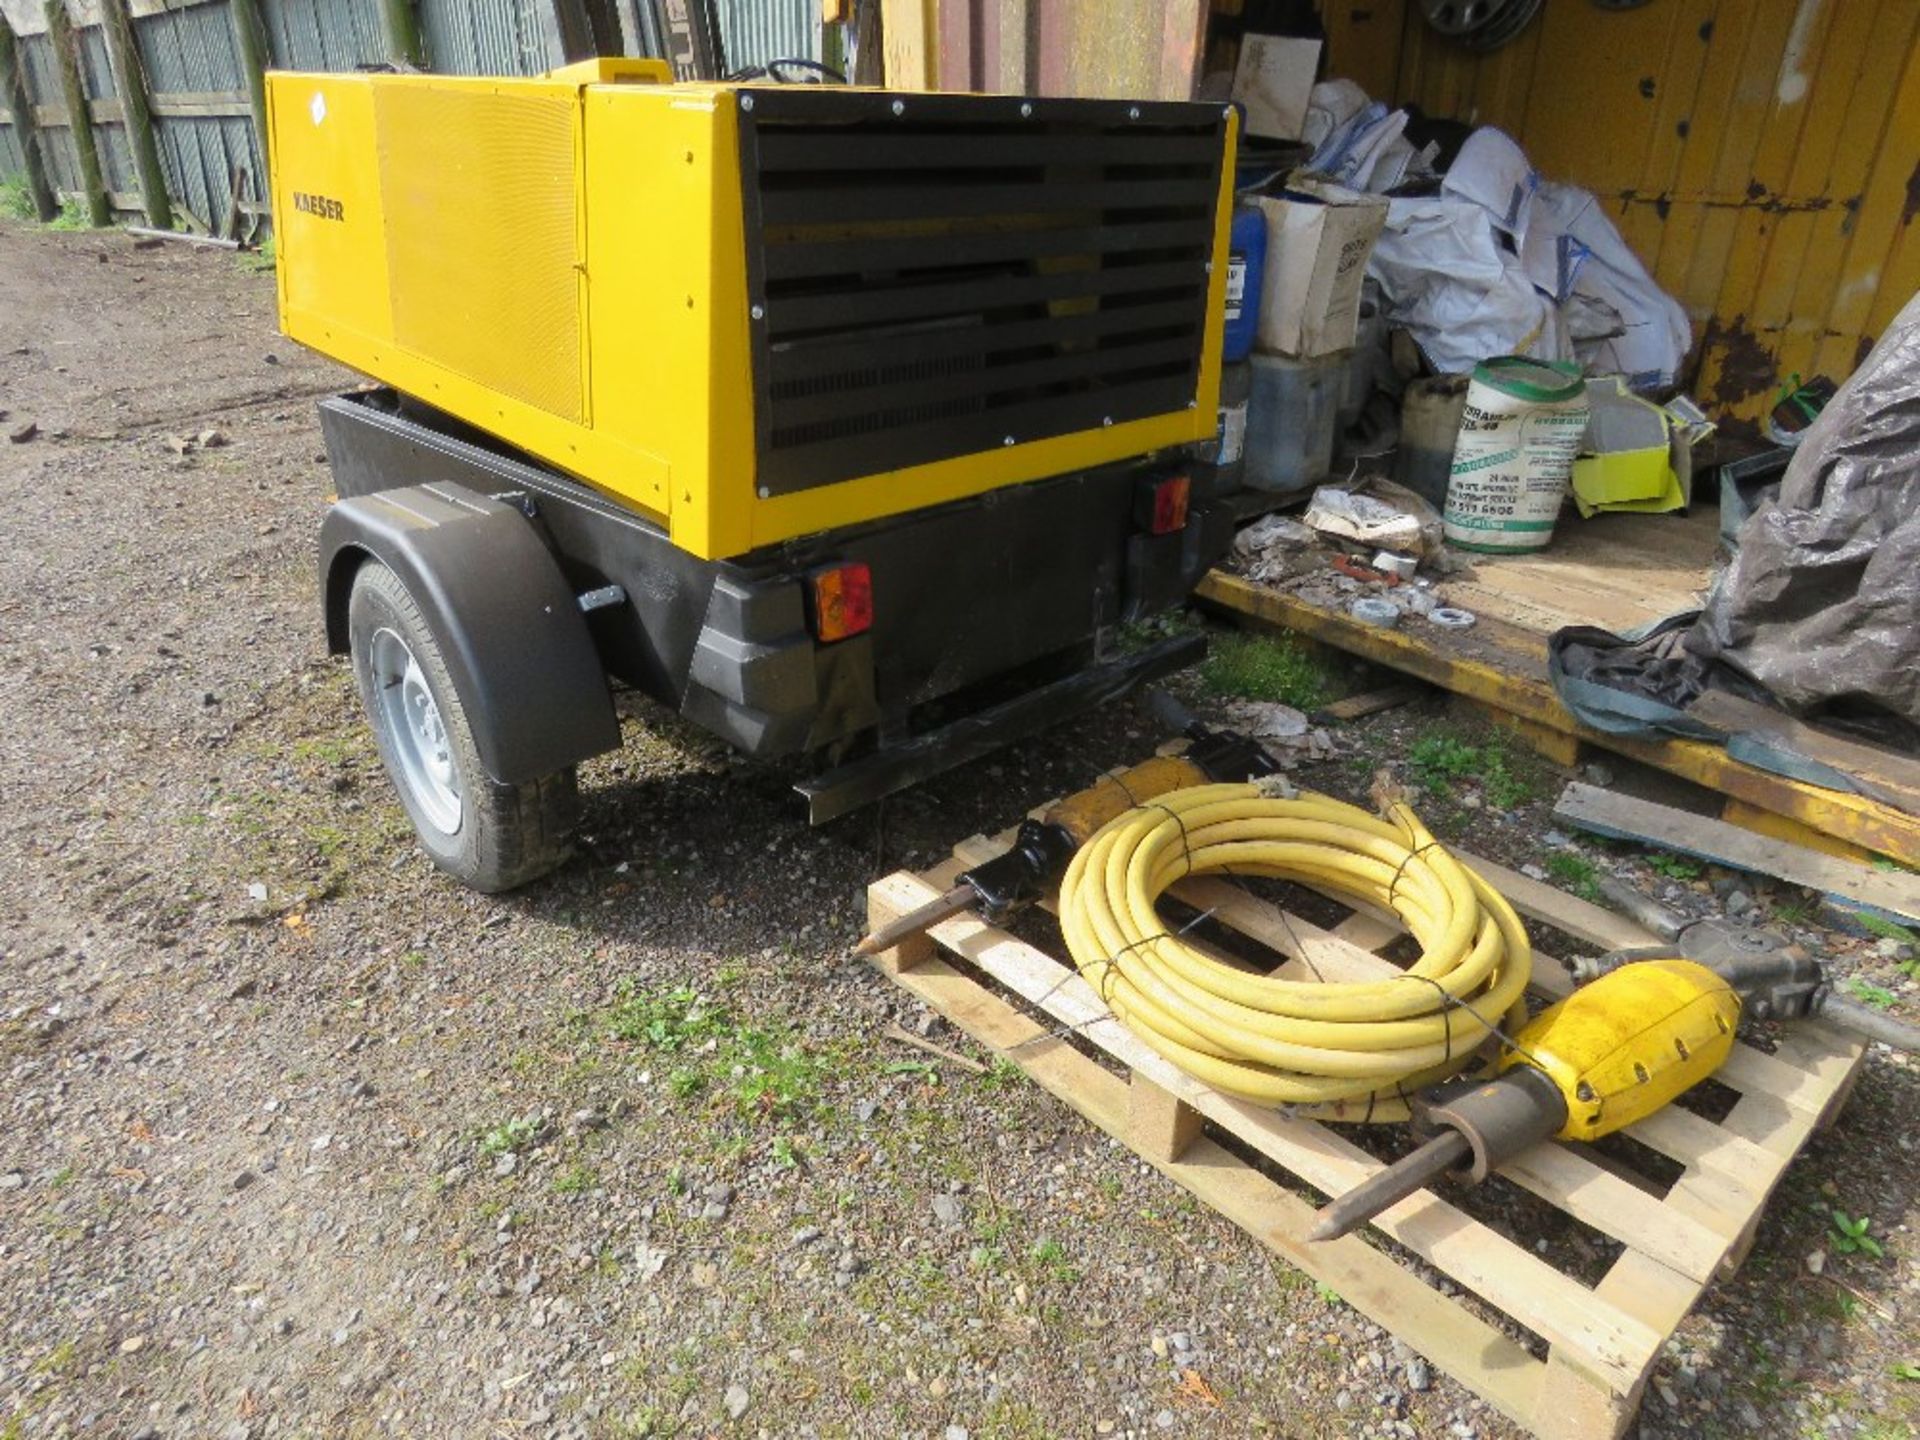 KAESER M50 COMPRESSOR 180CFM OUTPUT WITH 2 X HOSES AND 2 X GUNS. OWNER RETIRING. WHEN TESTED WAS SEE - Image 3 of 16